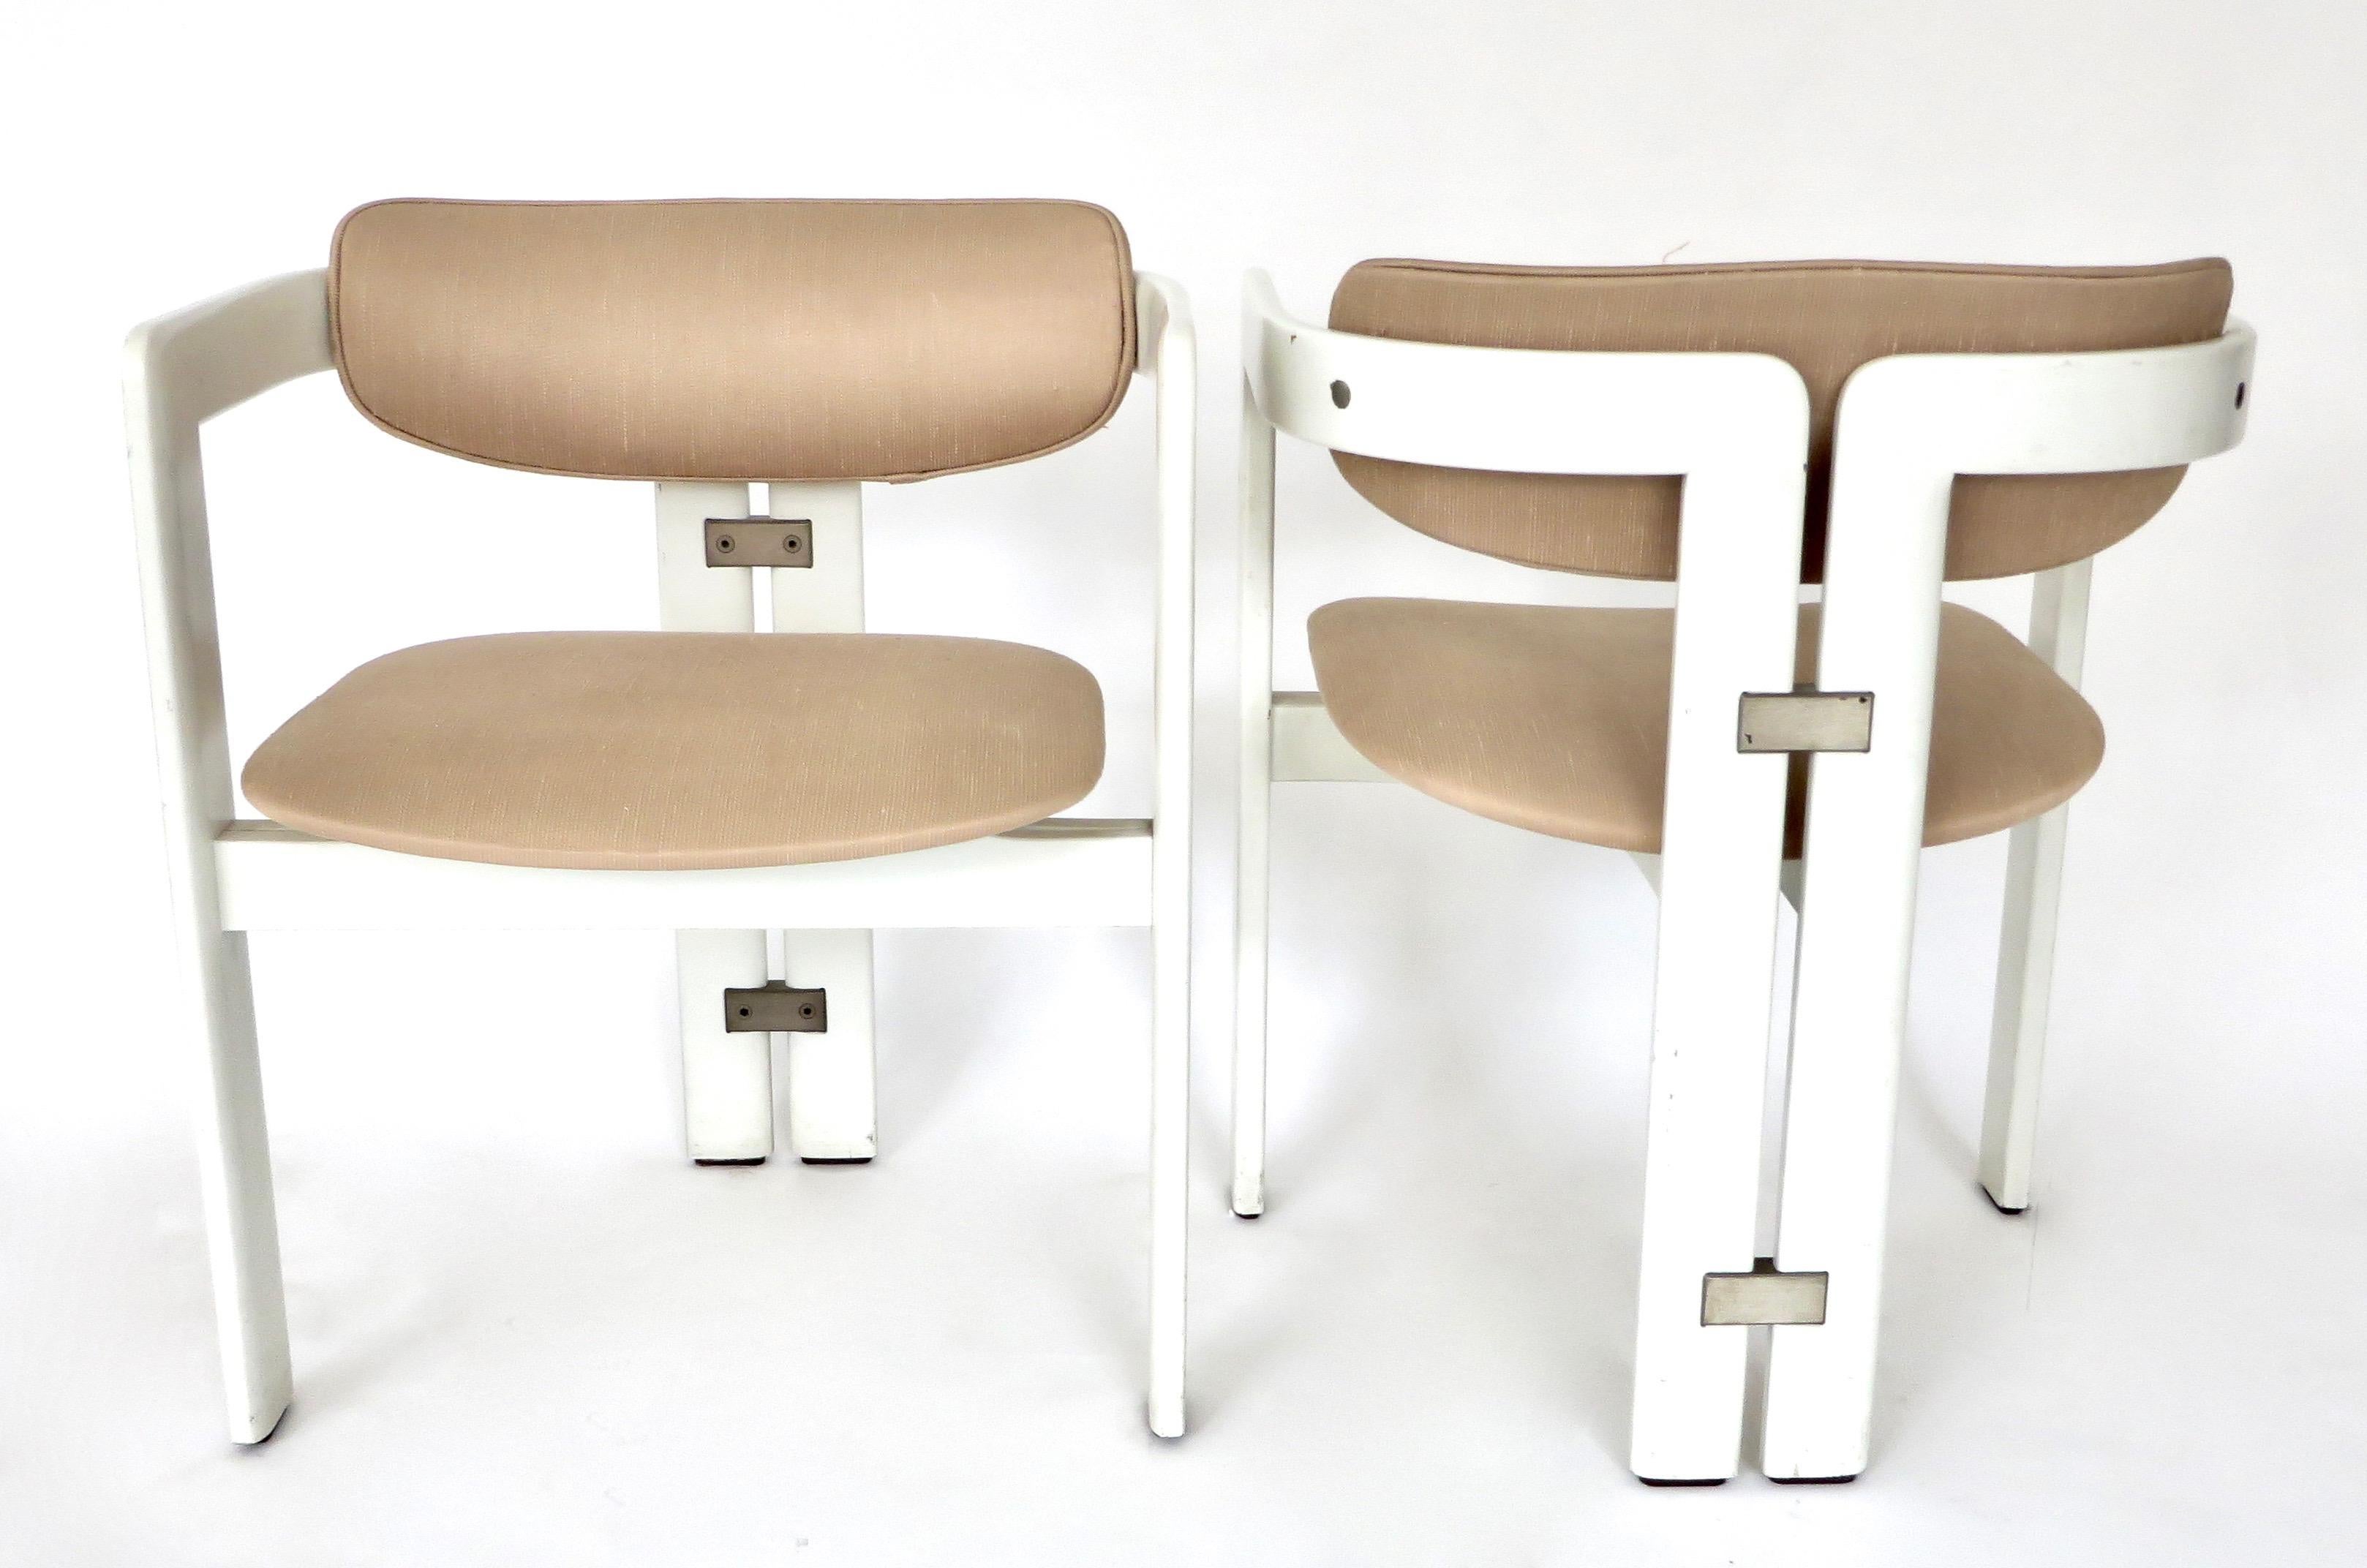 Pair of model Pamplona chairs by Augusto Savini for Pozzi, Italy, 1965.
White lacquer frame with original pale pink upholstery. Chrome-plated steel details.
All in the original patina. Some loss to the lacquer.
Great desk or occasional chair or